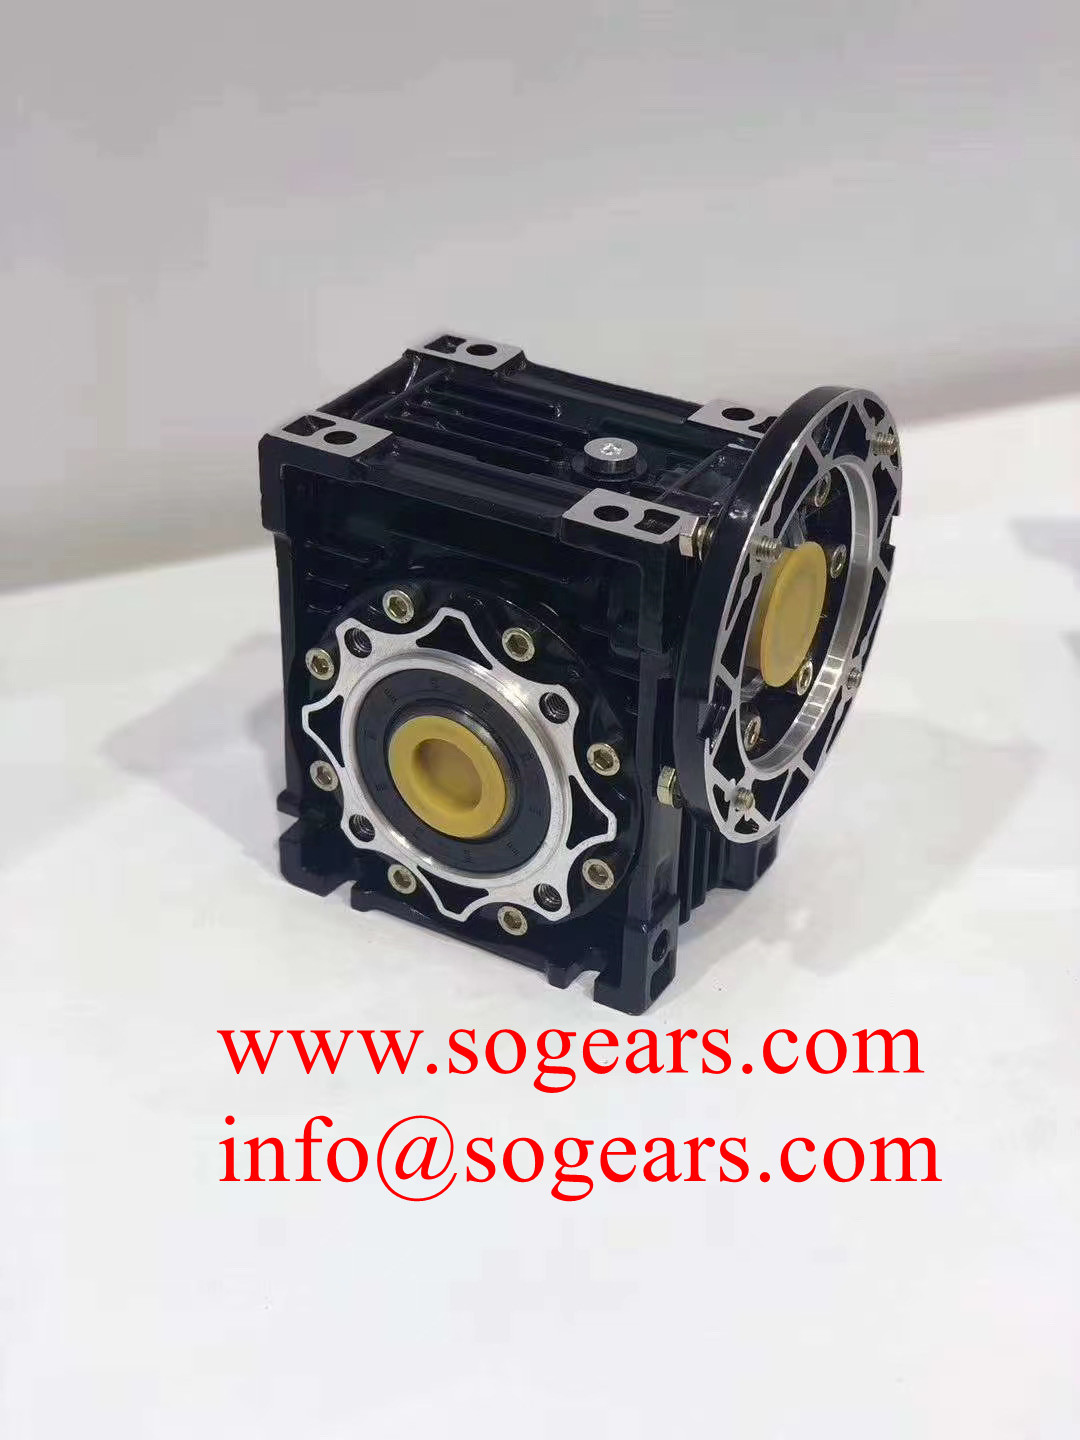 Our quotation for ABB M2BAX 160MLA6 motor